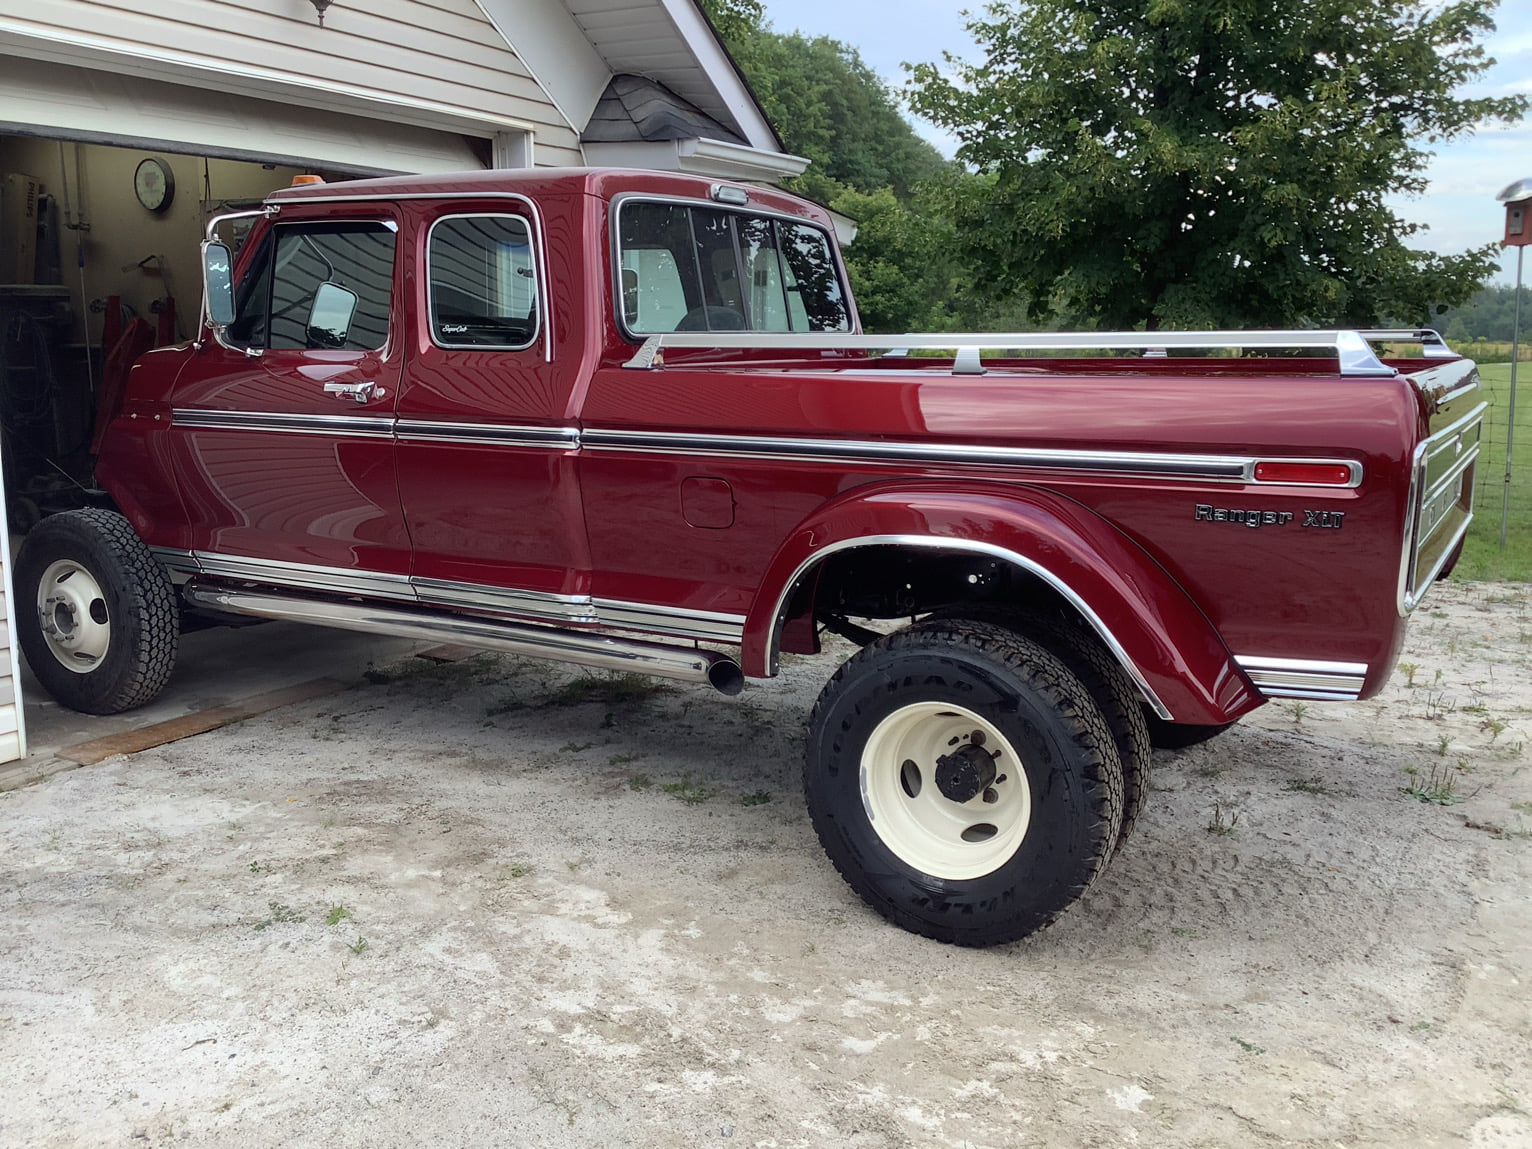 Ford L-350 Based on The LS series Louisville 5.jpg